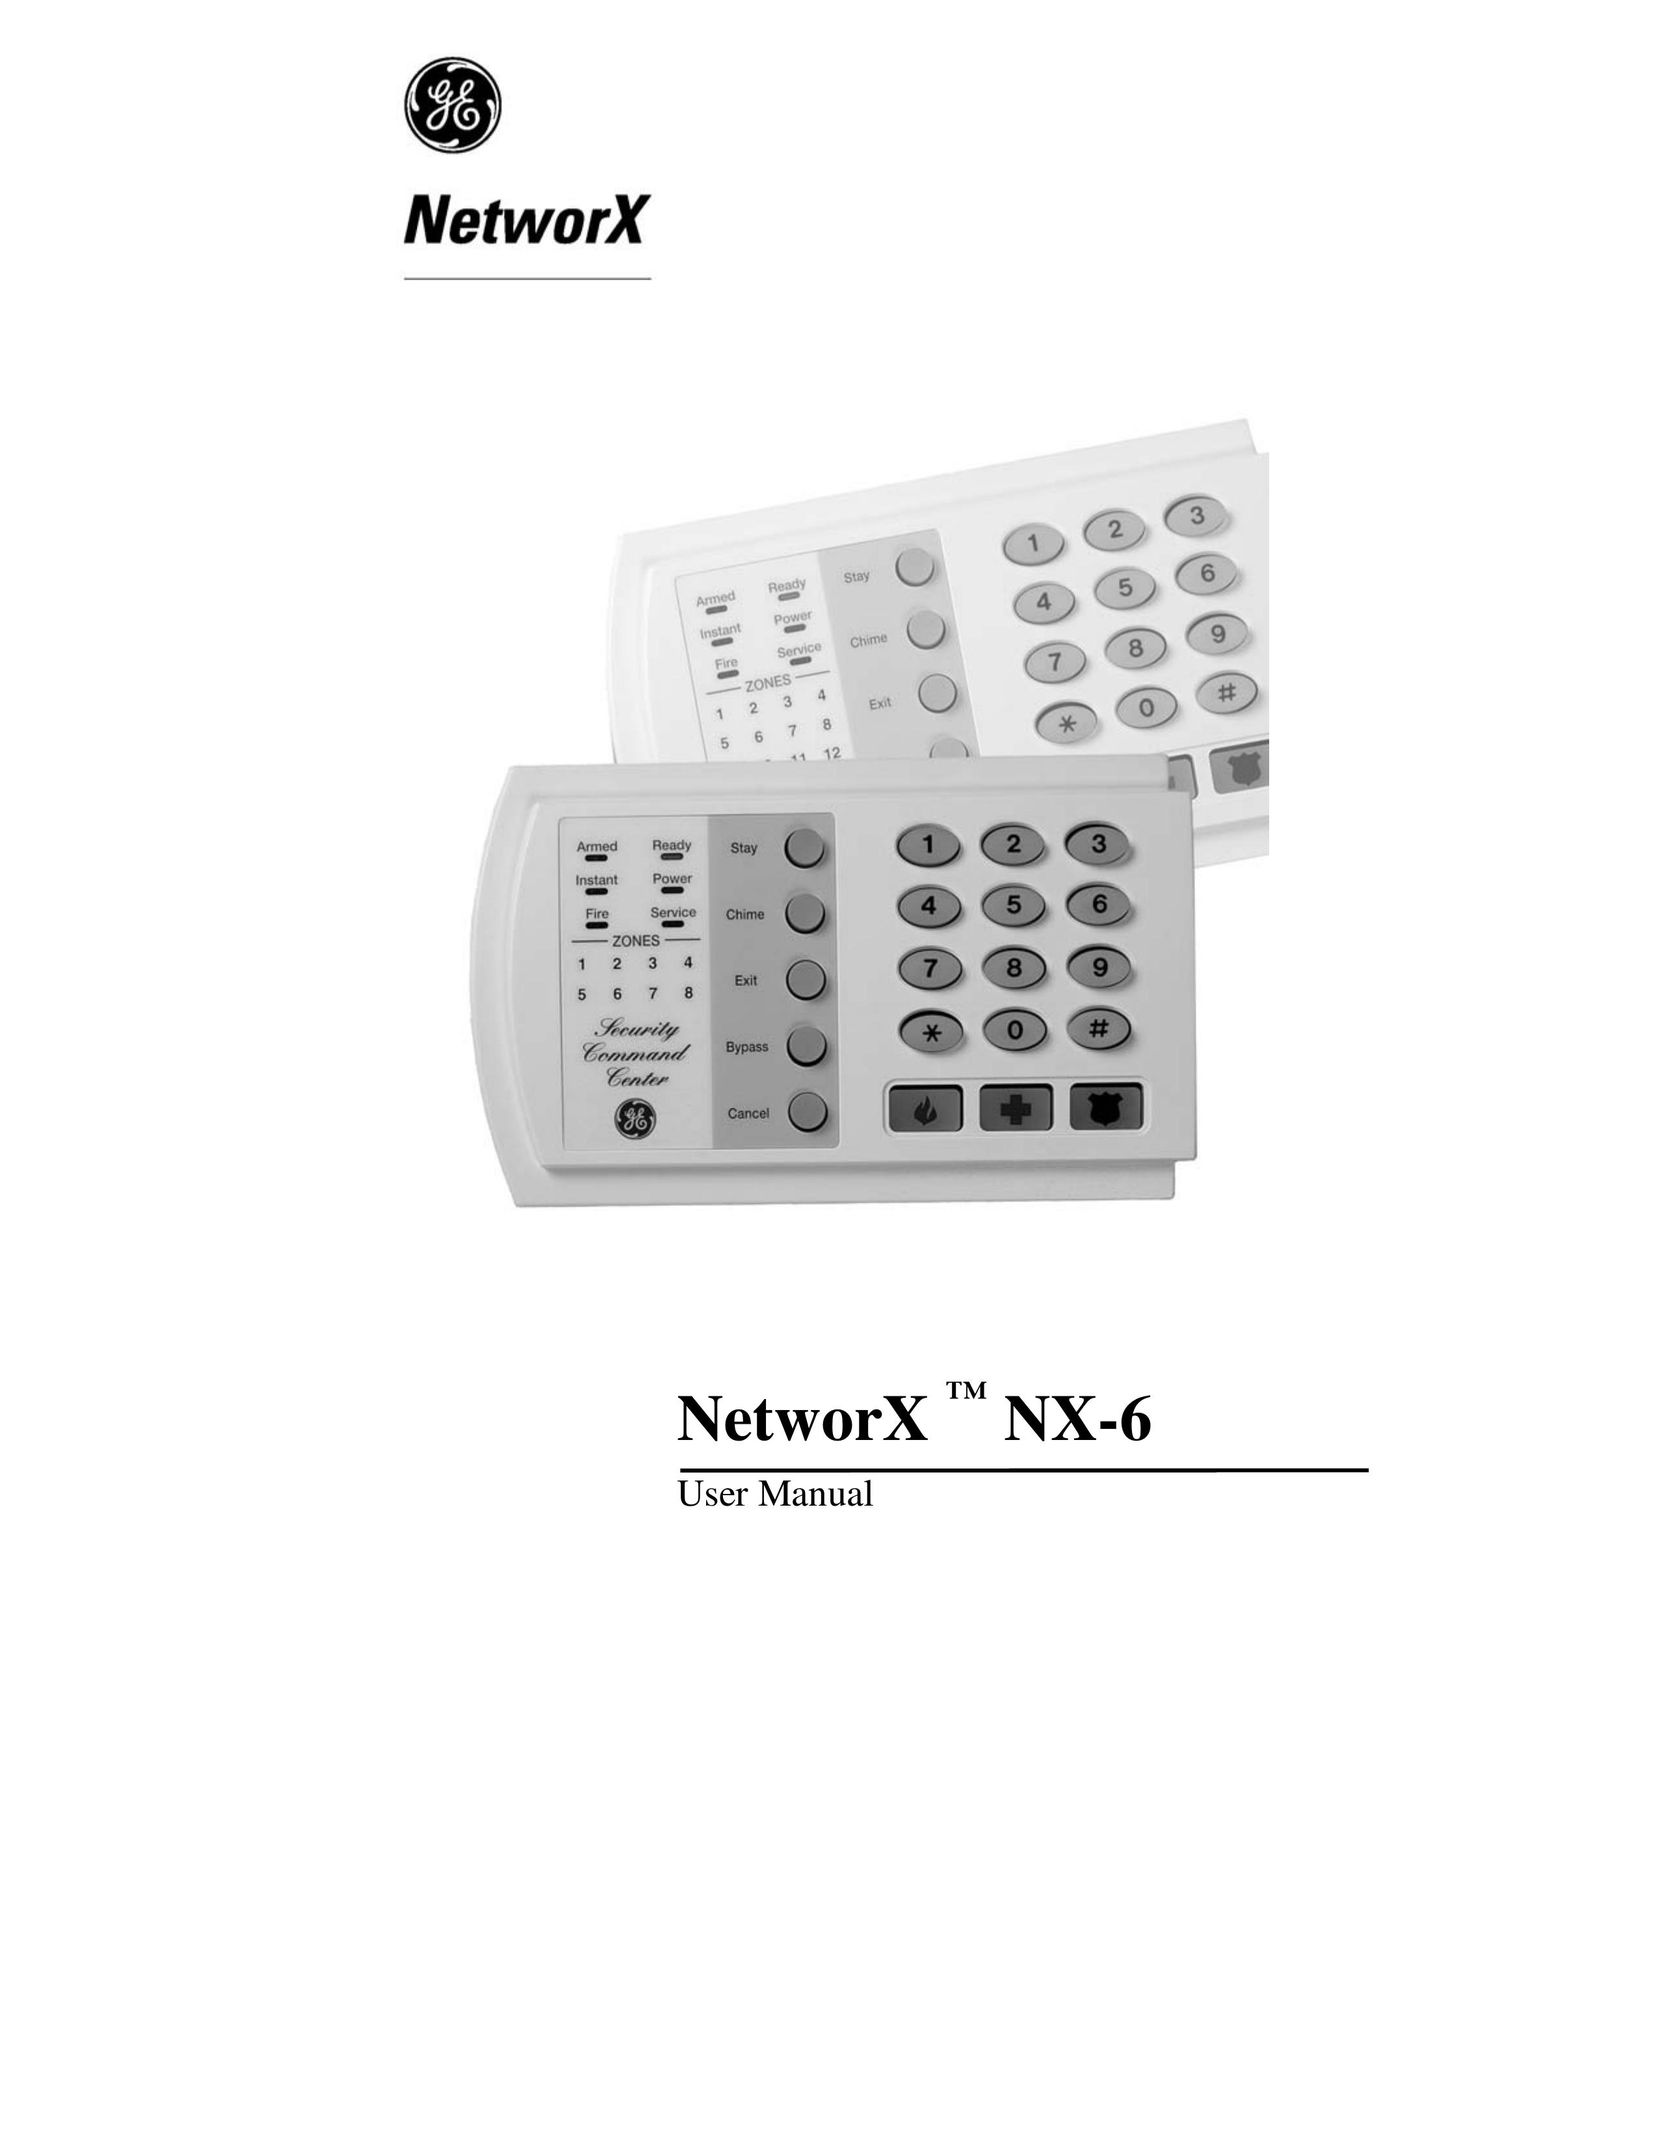 GE NX-108E Home Security System User Manual